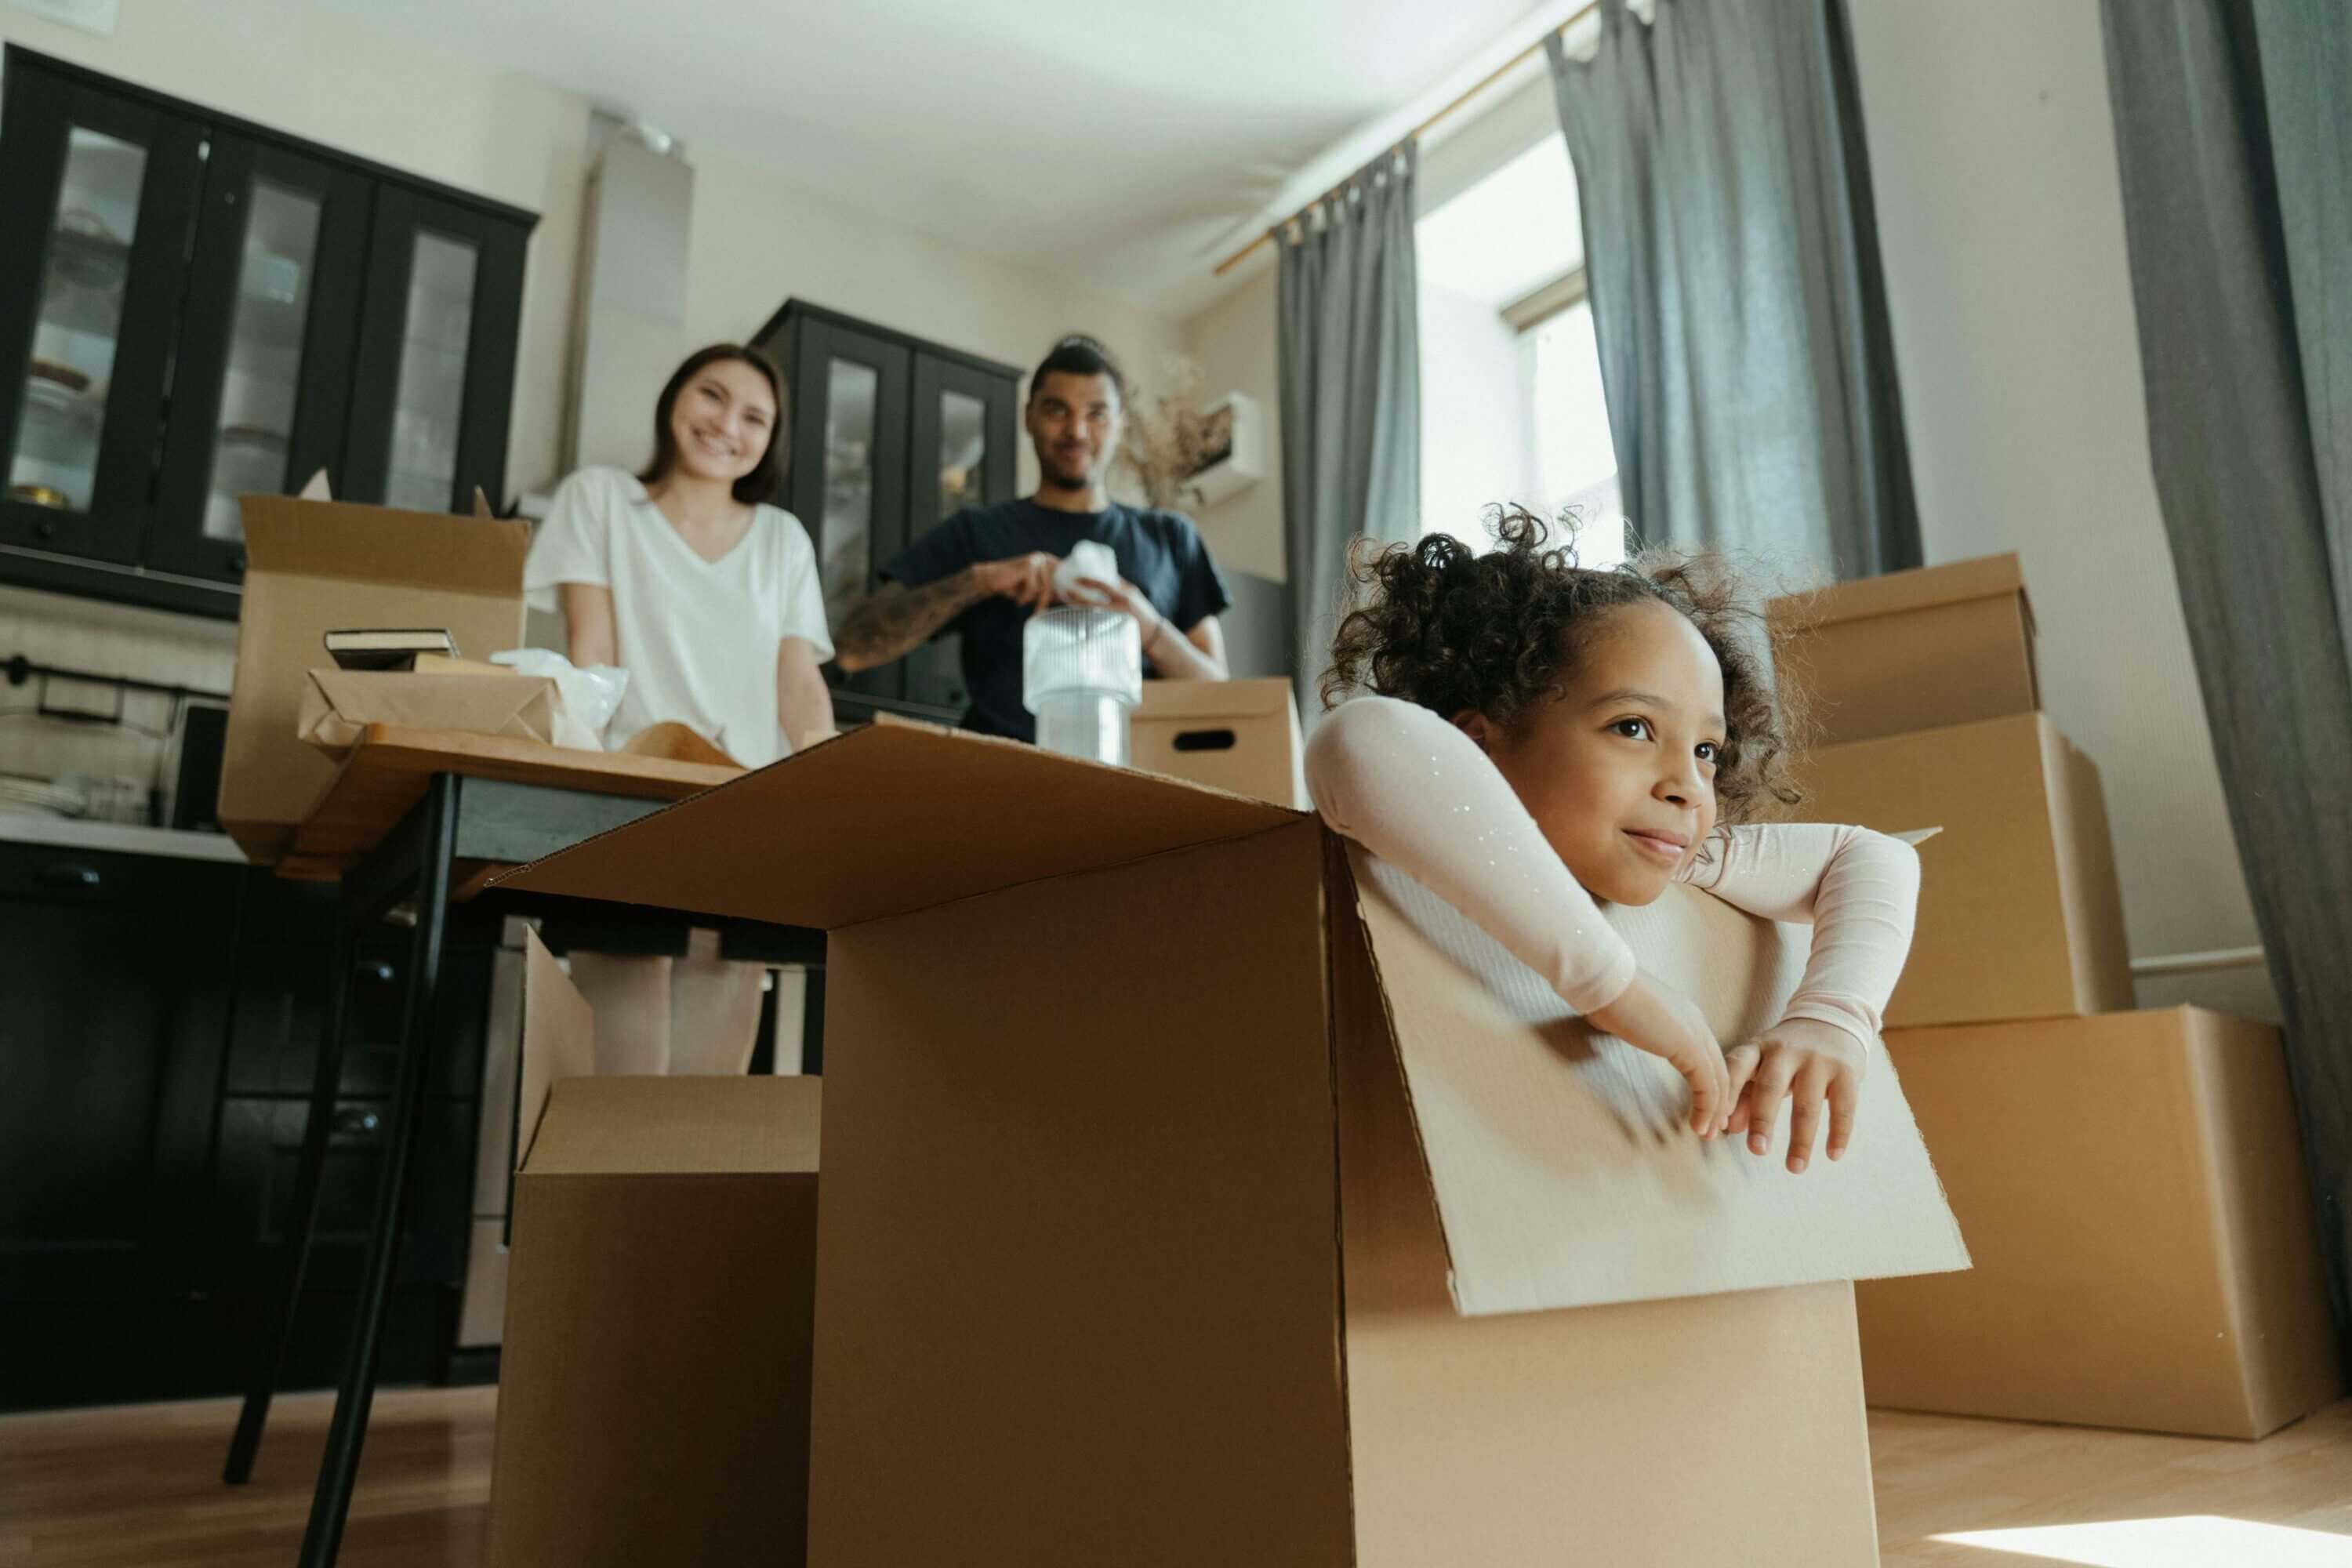 A young girl hangs out of a moving box while her parents unpack at their new house.